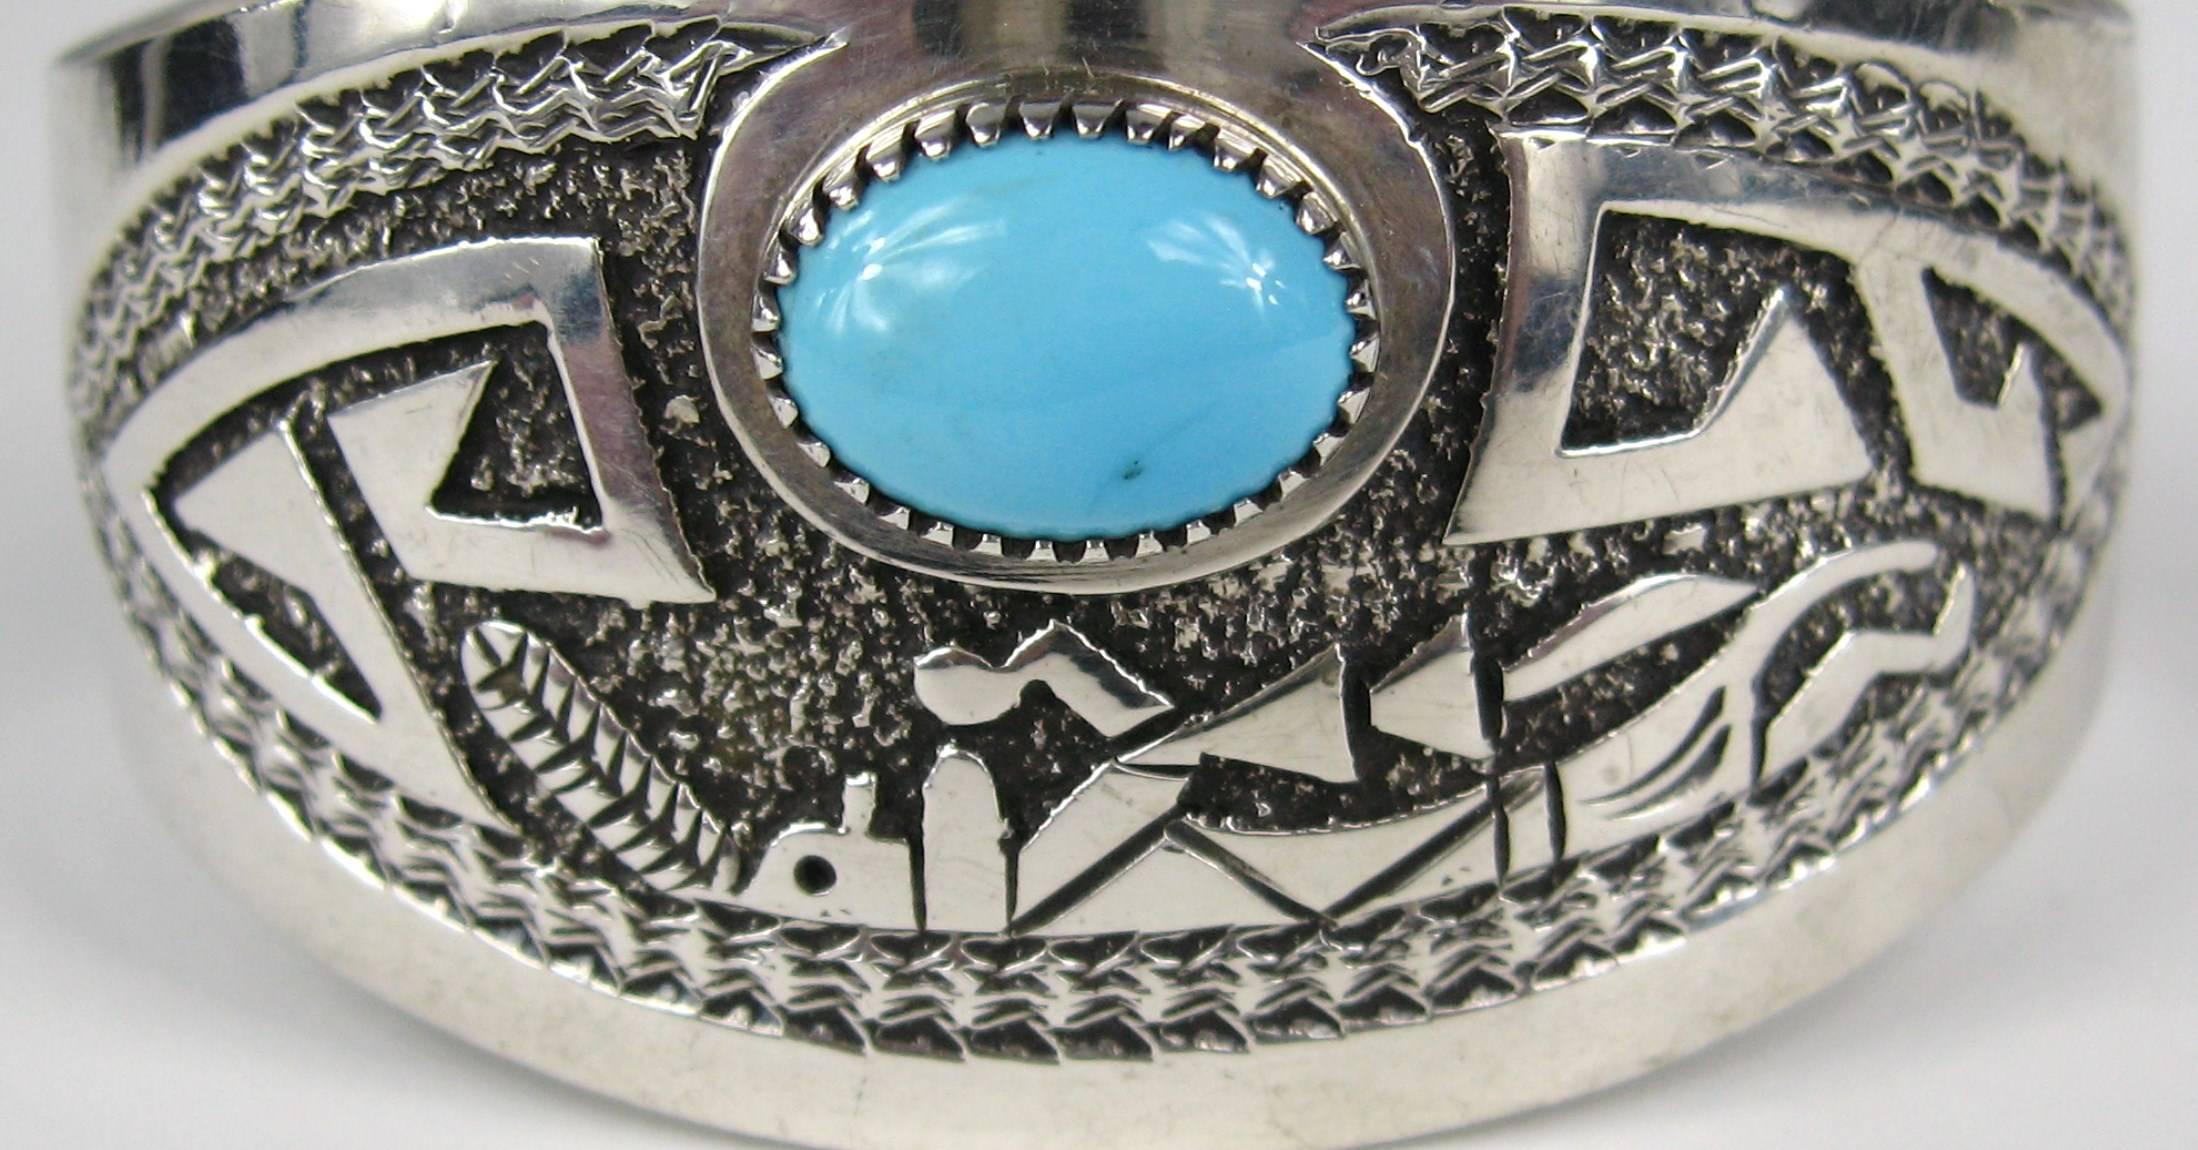 Stunning Navajo Sterling Silver Bracelet. Engraved Dancer. Has a Large Bezel Set Turquoise Stone. Hallmarked Gibb. Measuring 1.32 in. wide with a .96 in. opening. Will fit a 6.5 in. to 7 in. wrist and can be adjusted a bit smaller or larger. This is